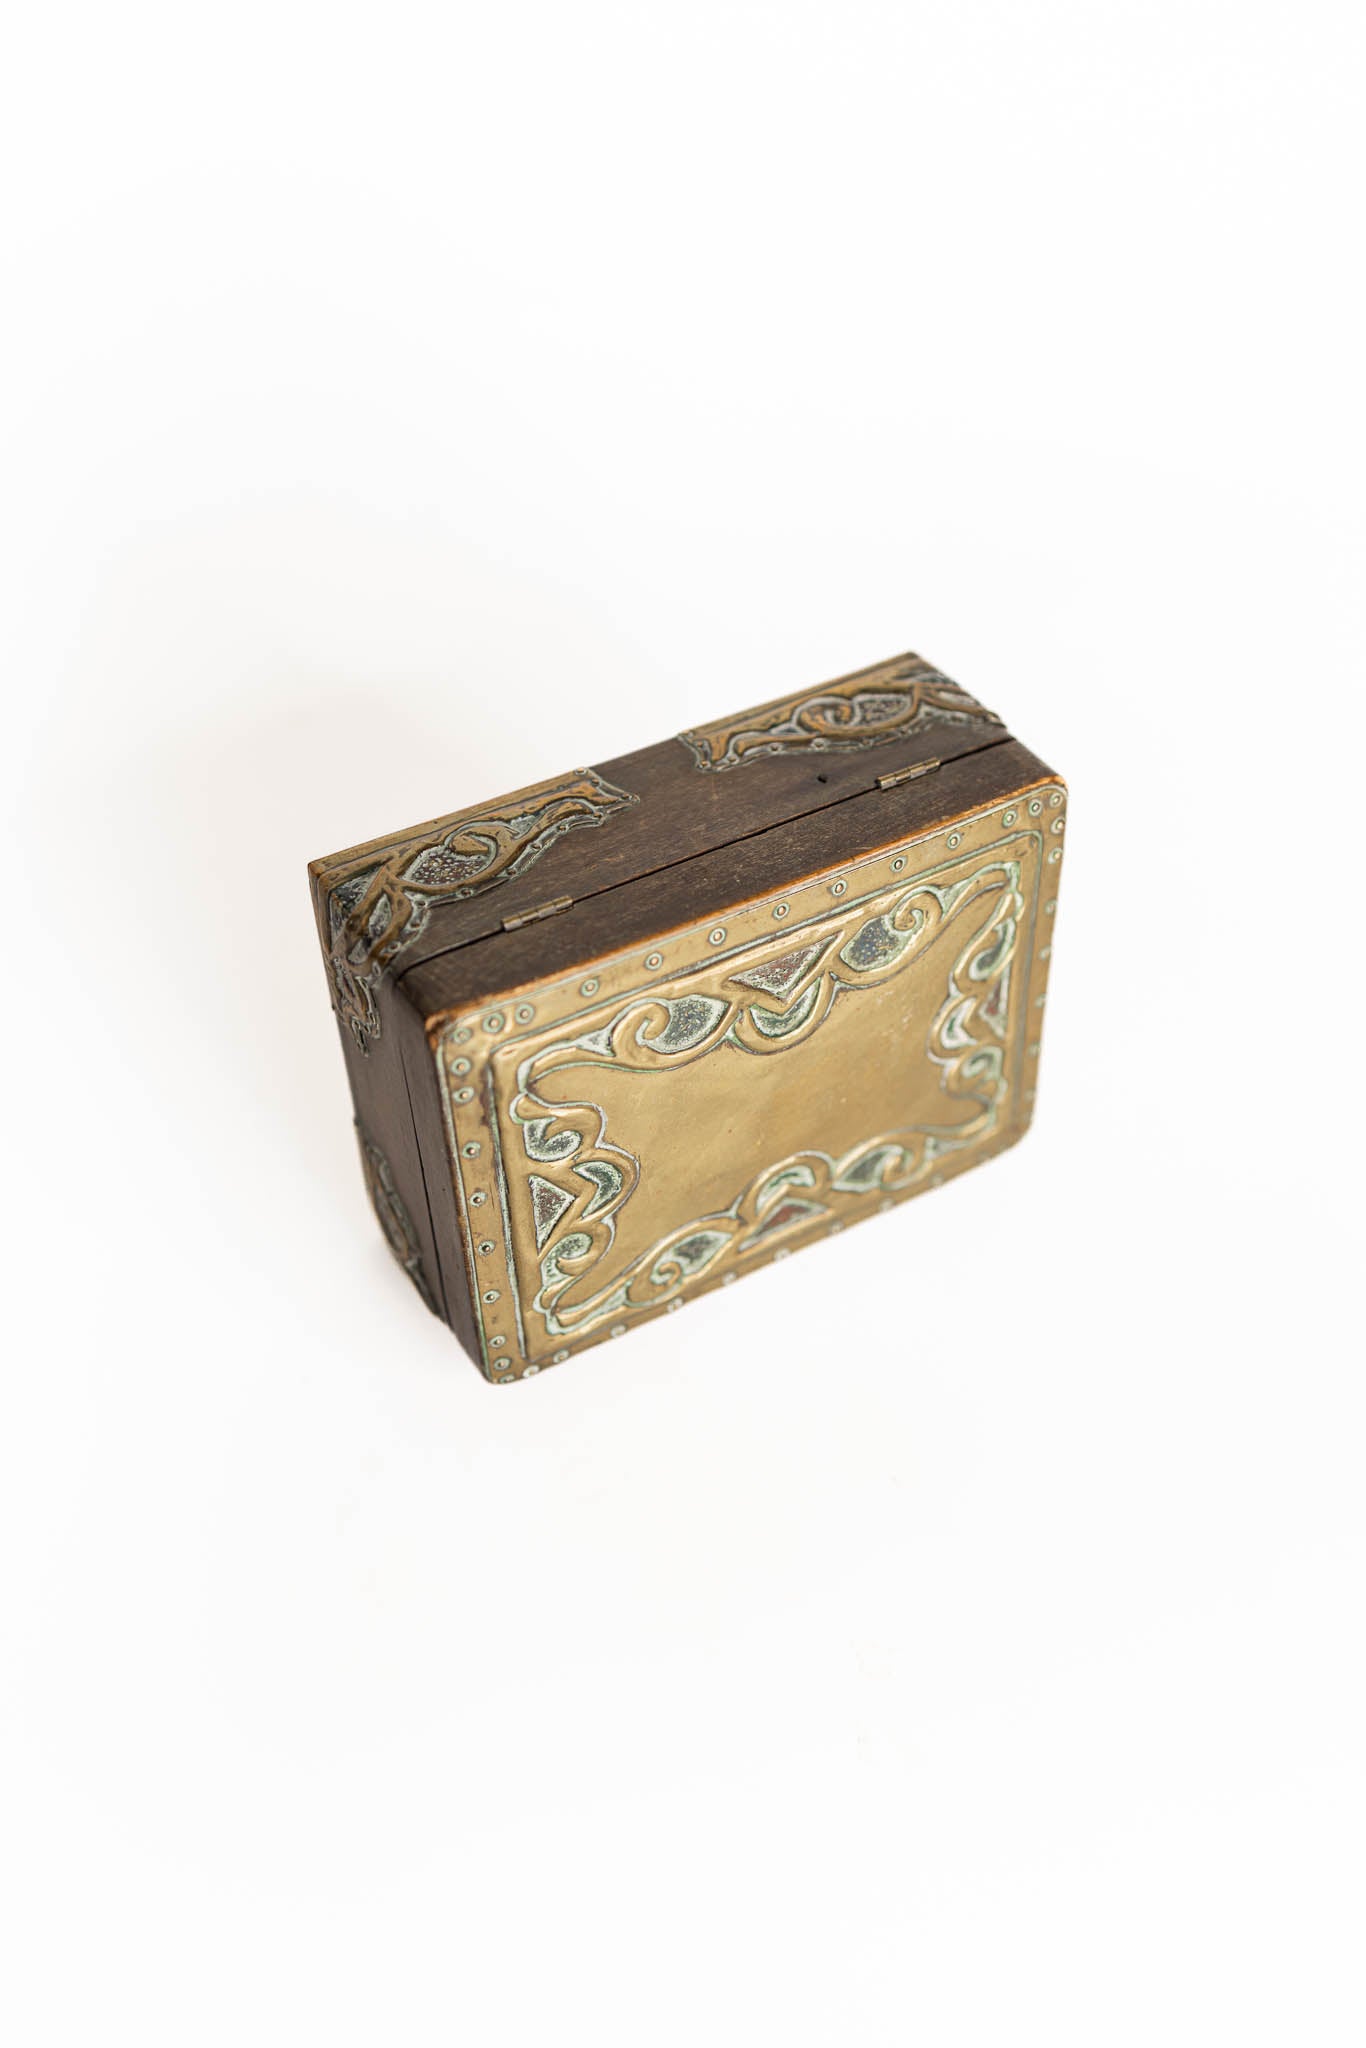 Small Wood and Brass Antique Card Box